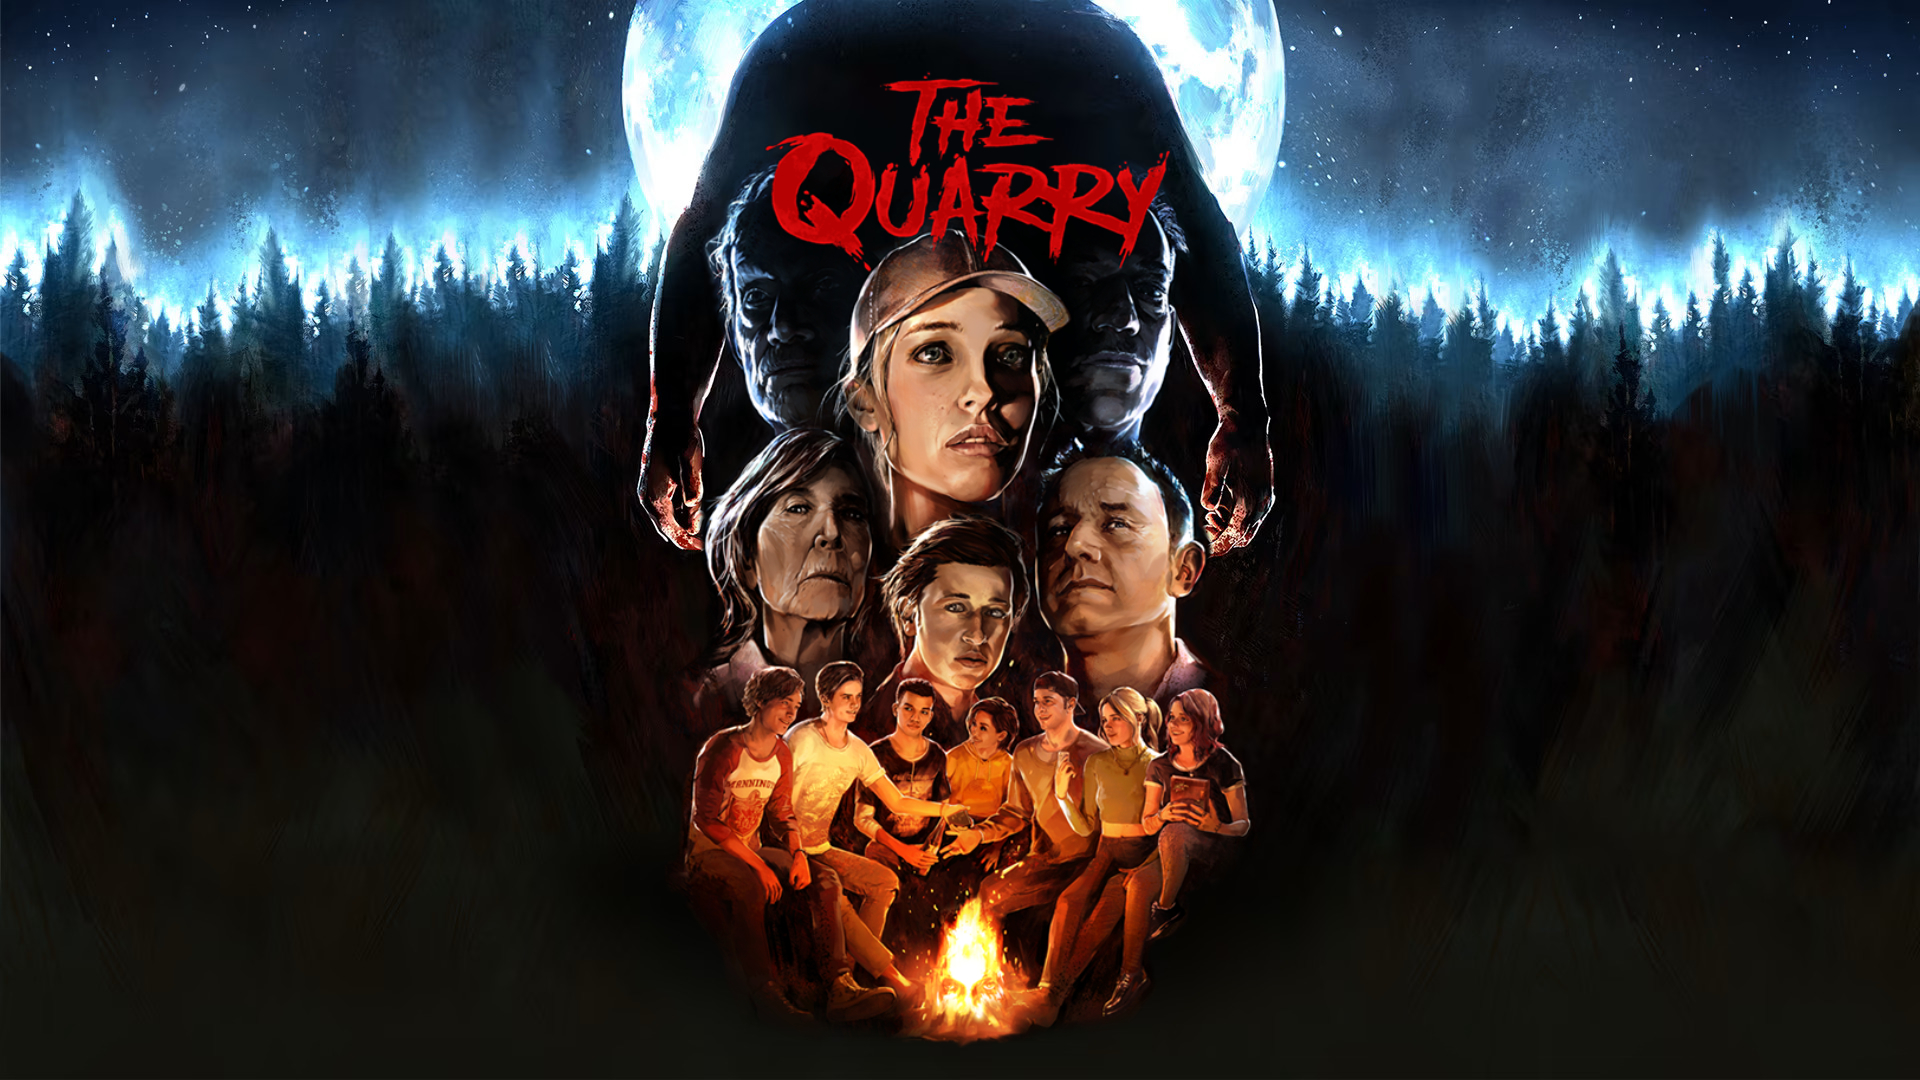 The Quarry system requirements – hefty CPU and GPU specs